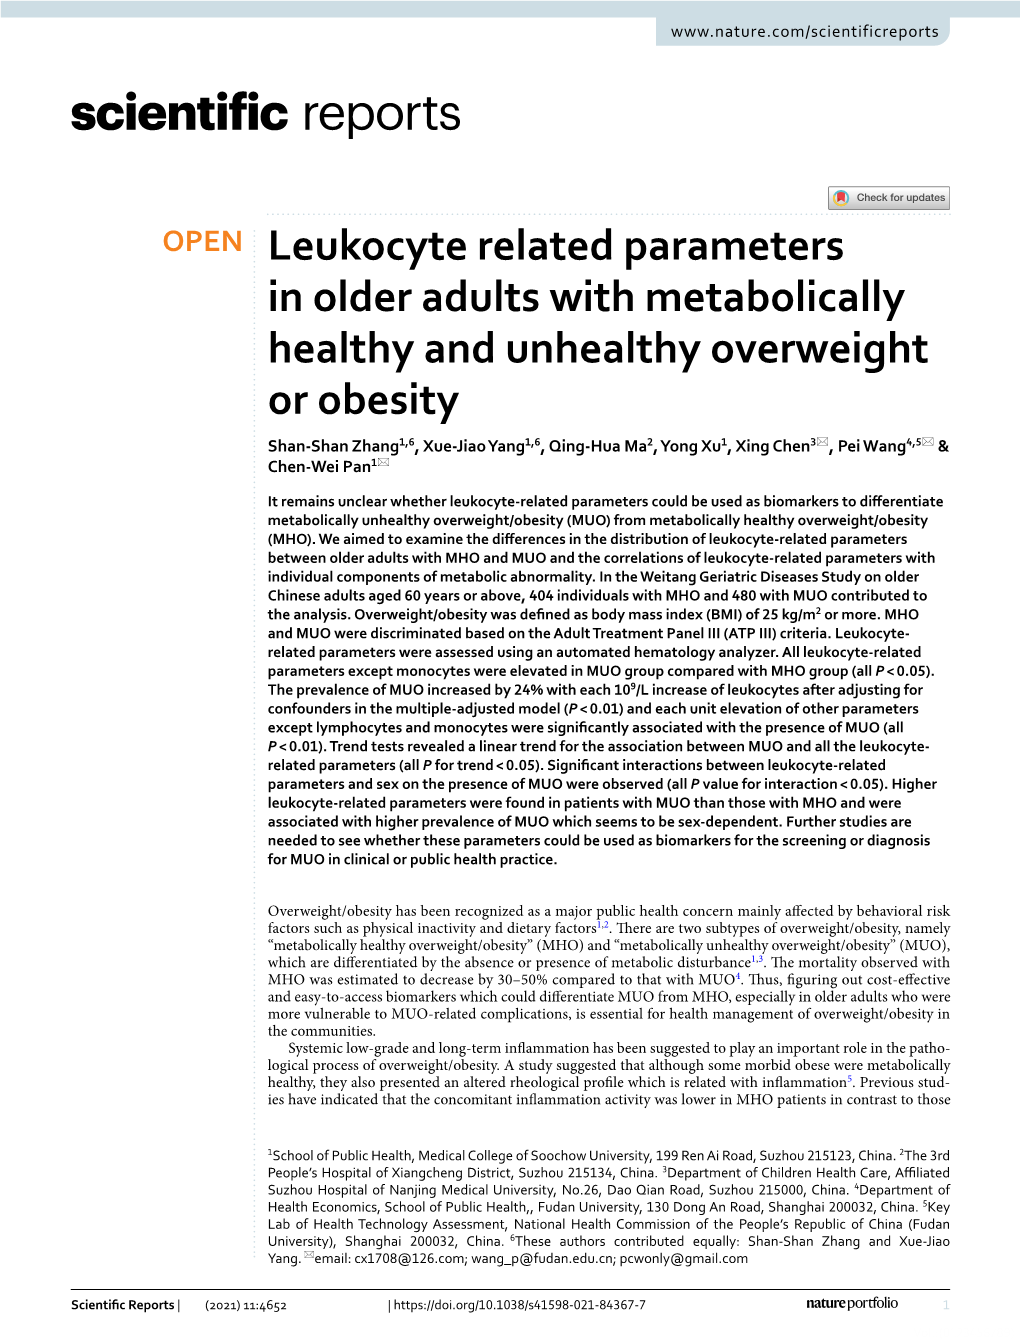 Leukocyte Related Parameters in Older Adults with Metabolically Healthy